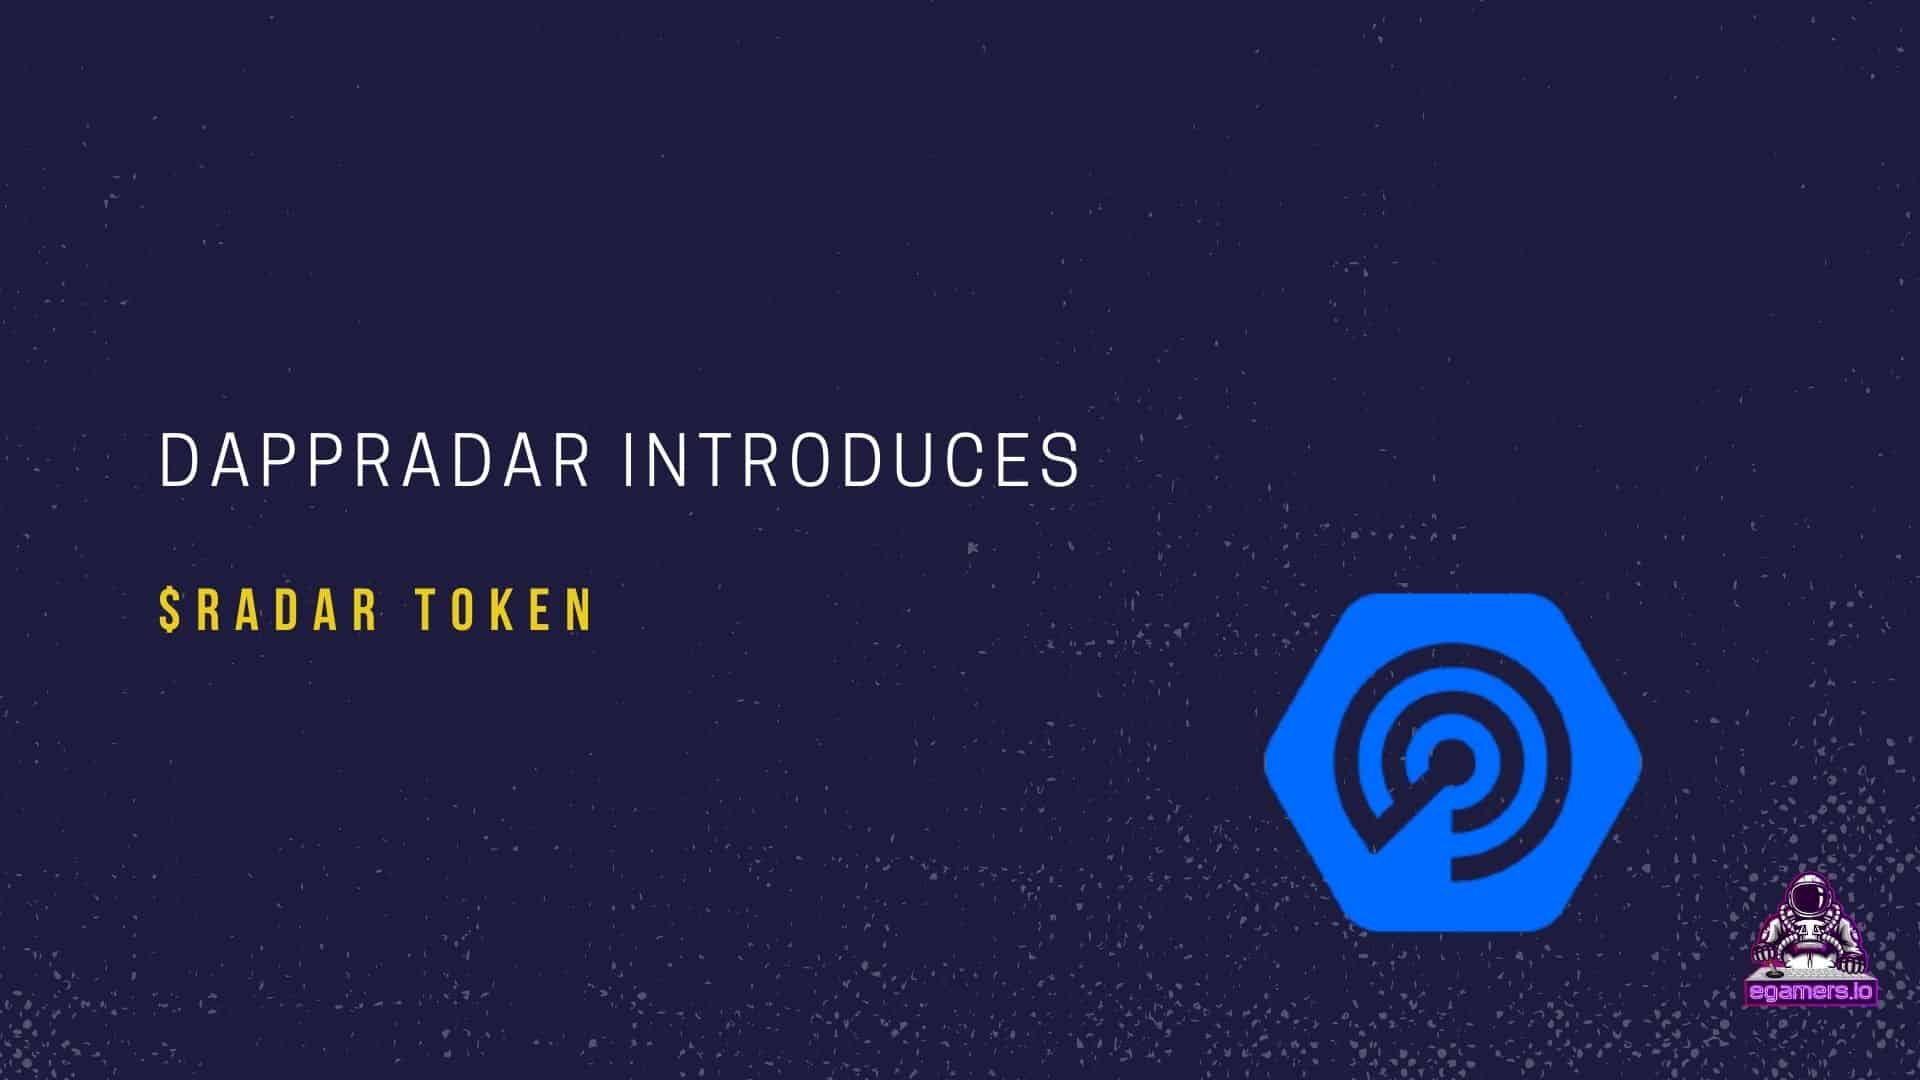 DAPPRDAR INTRODUCES DappRadar expands and help shaping the decentralized future.